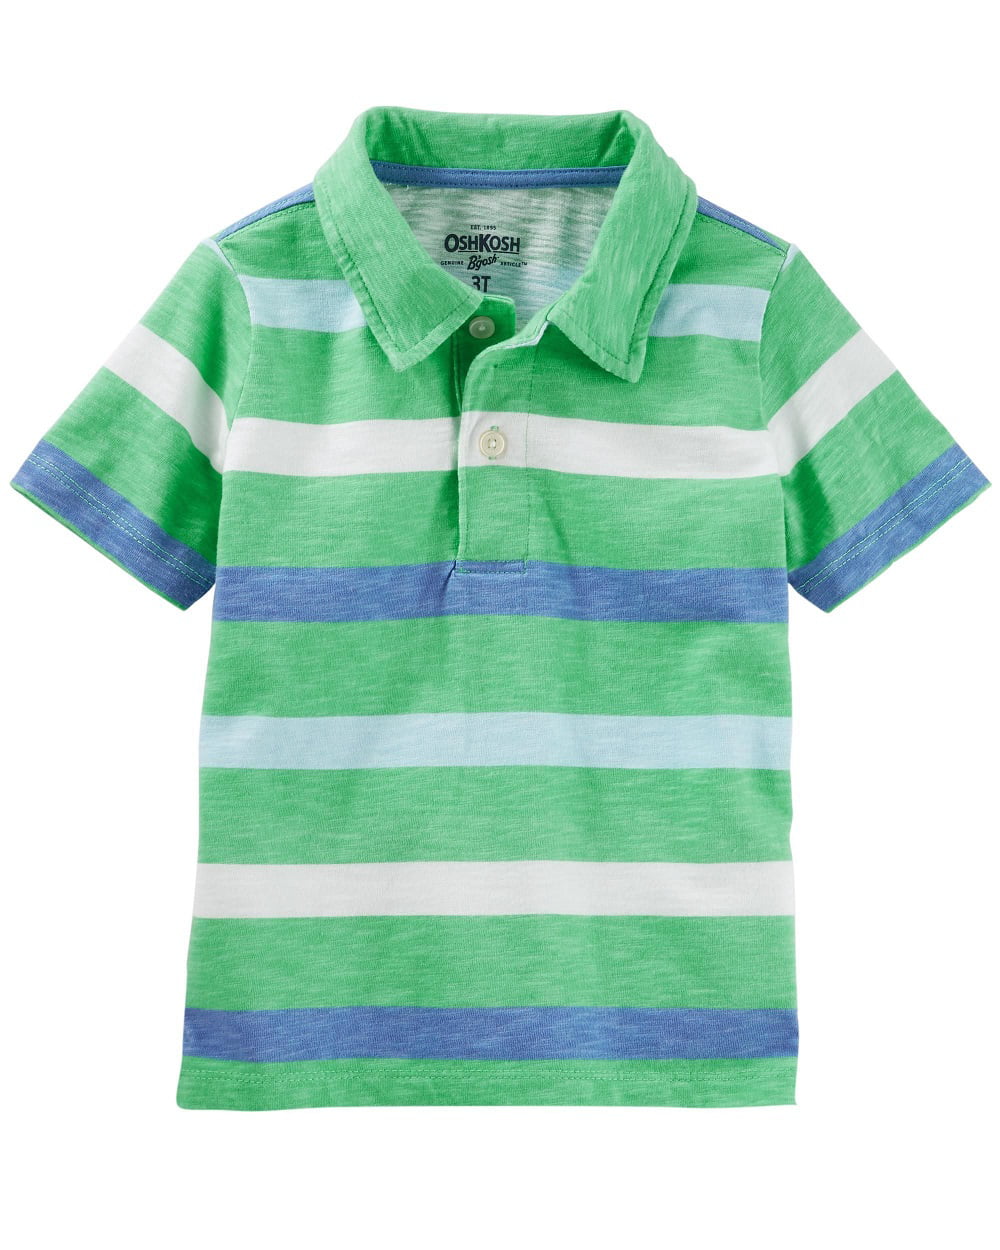 Little Boys colorful Striped Short Sleeve Polo Shirt Navy Blue Green 3T 